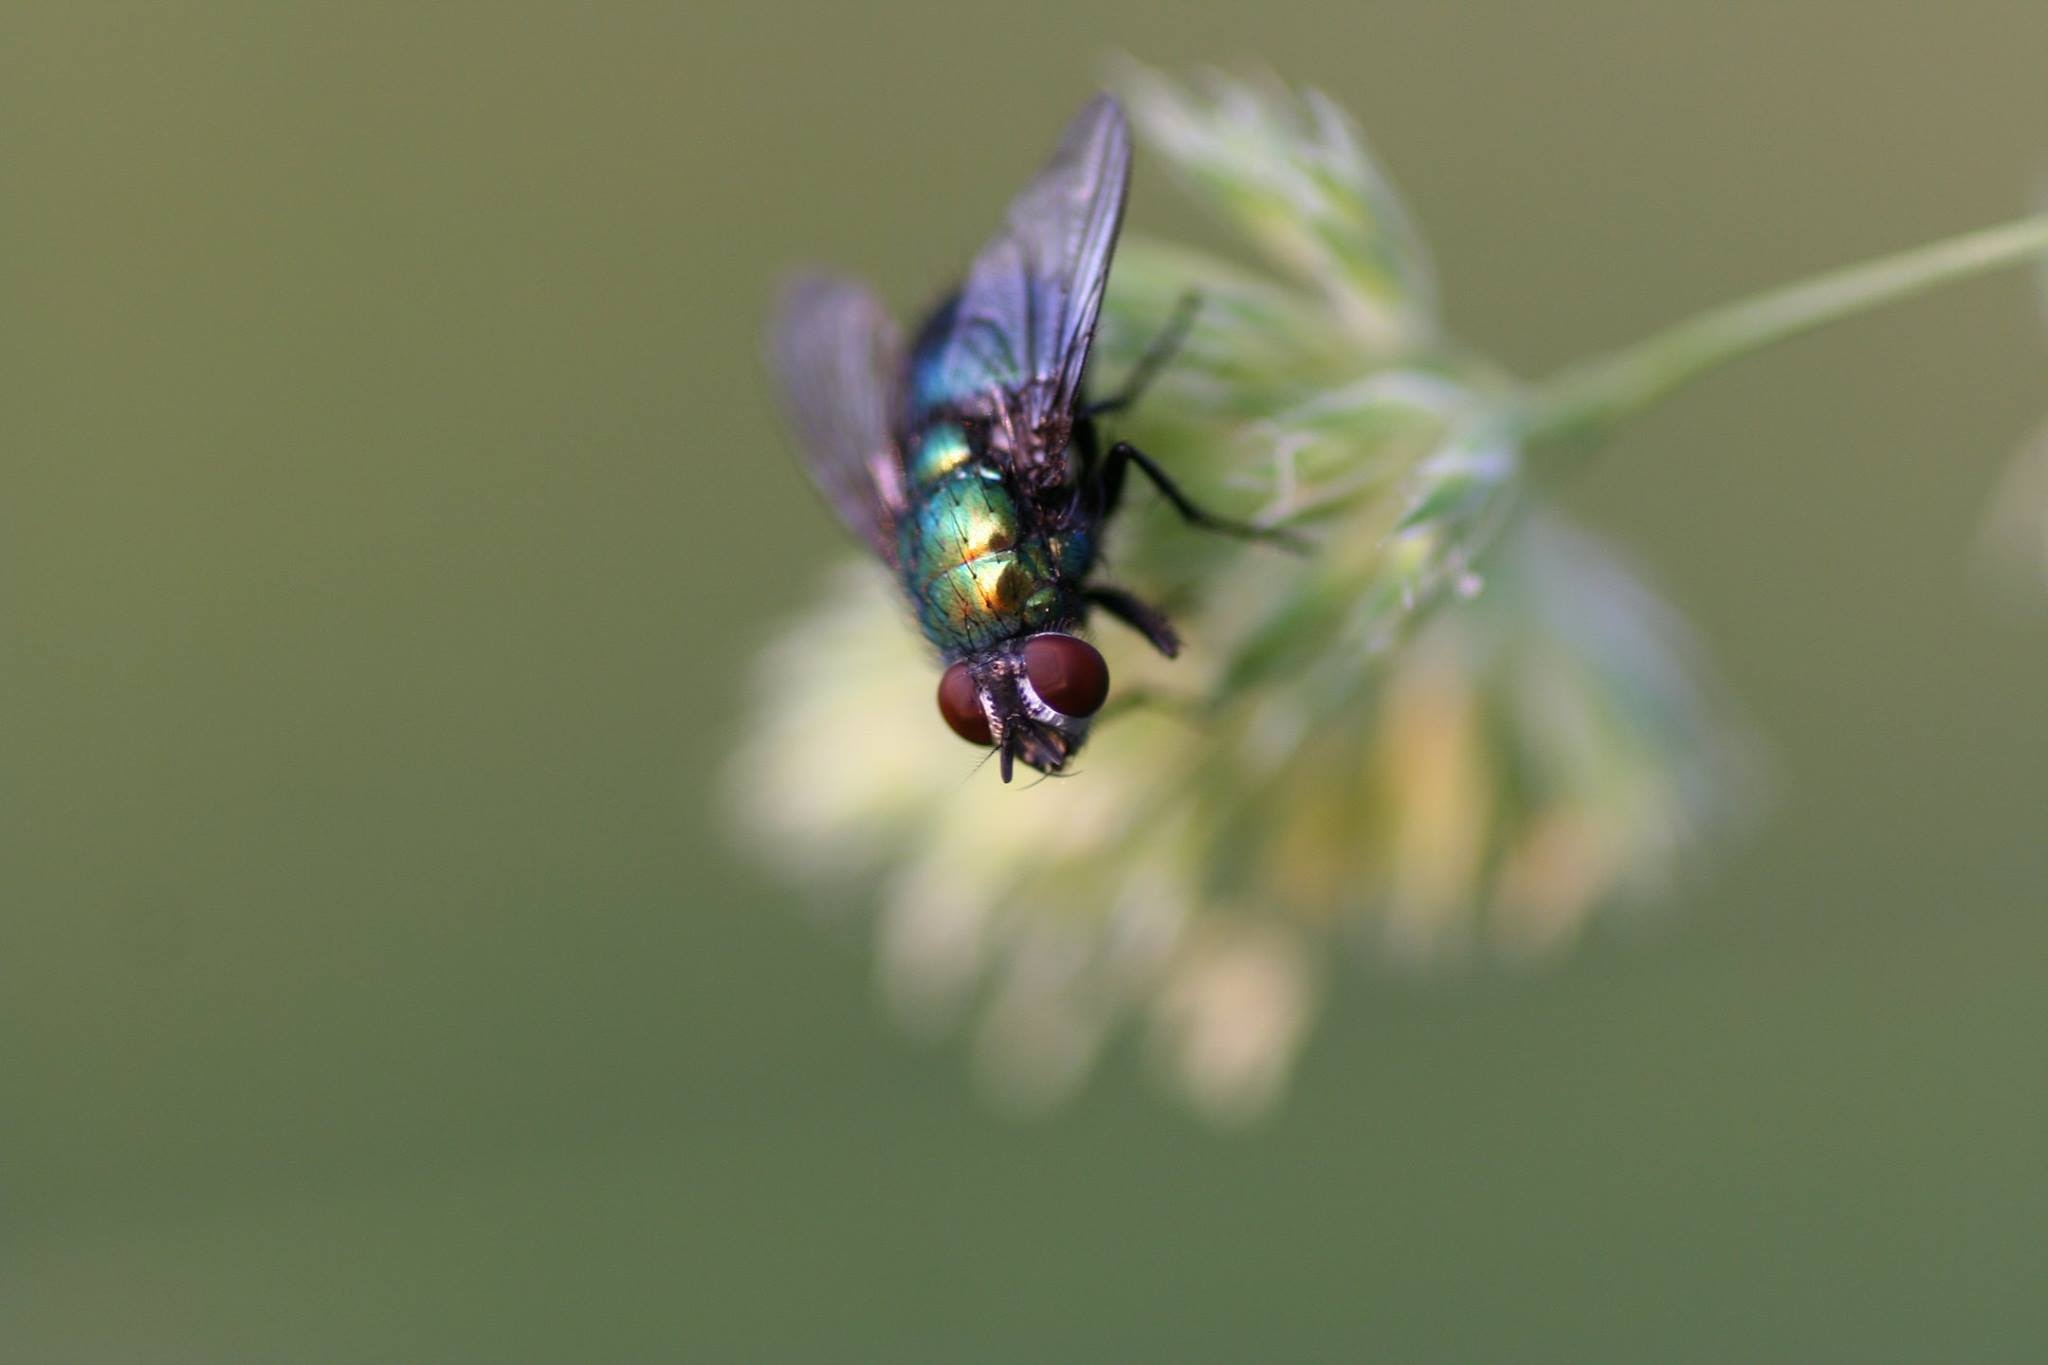 bottle fly on green flower in closeup photography